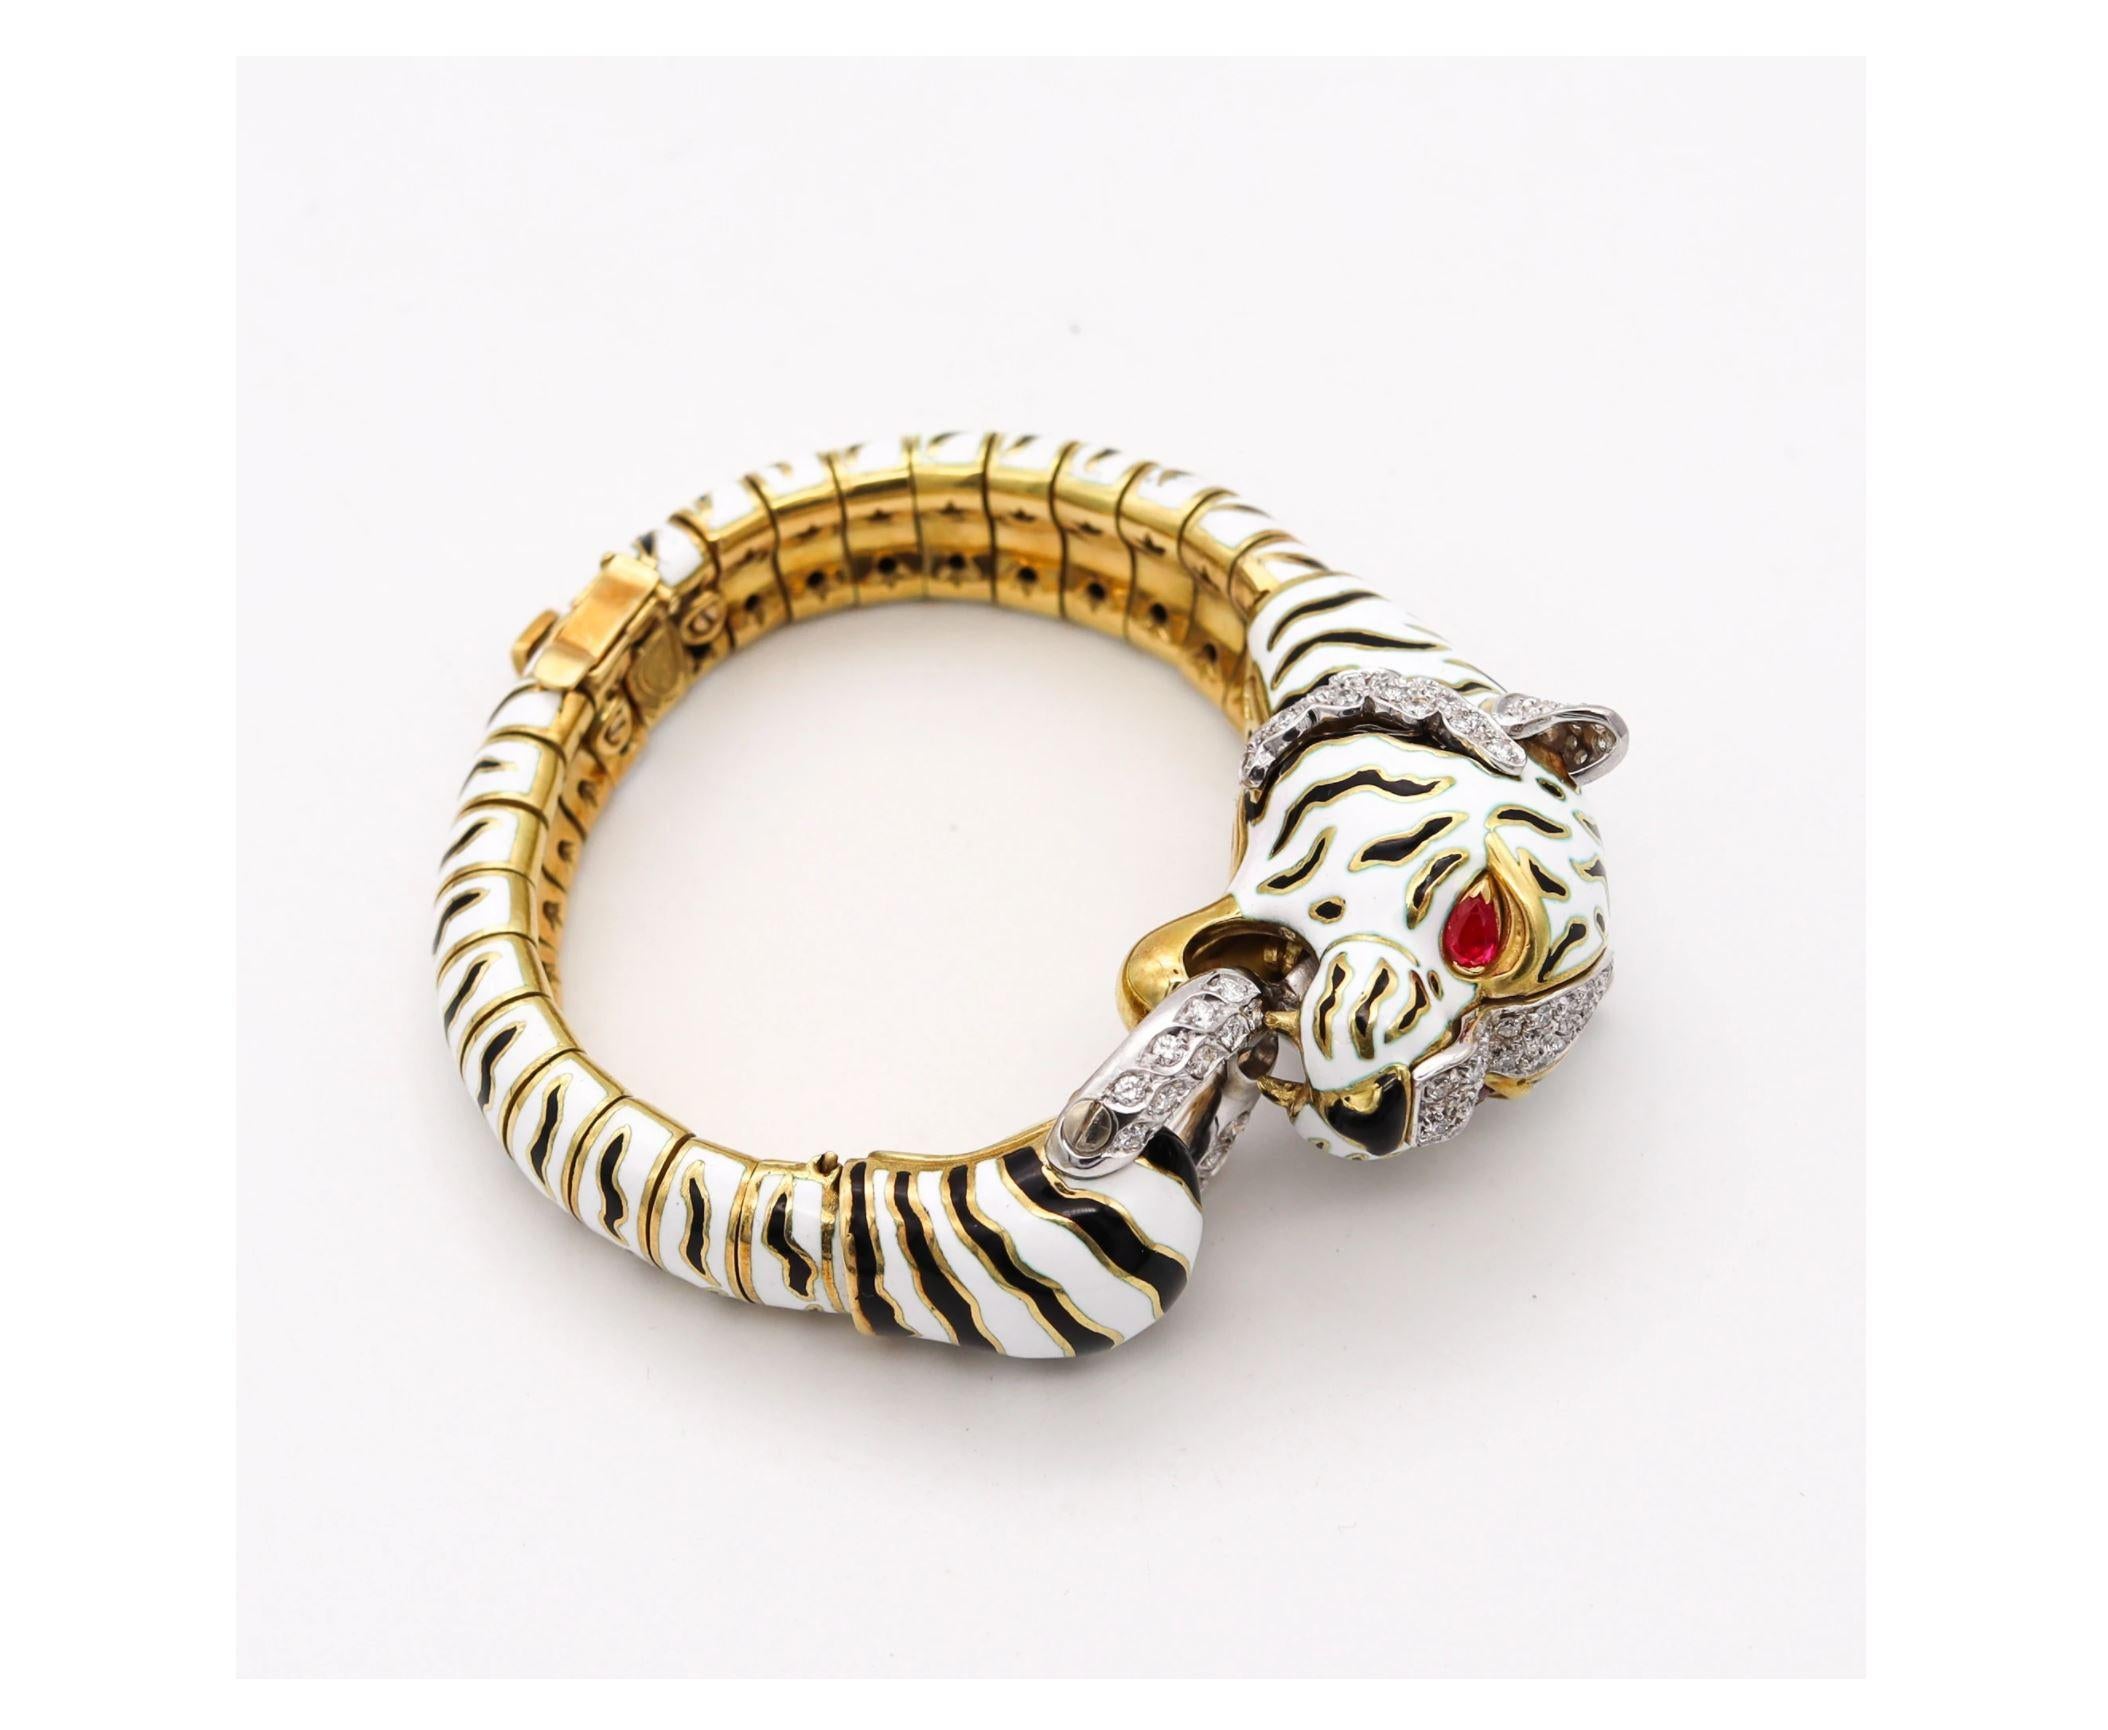 Magnificent jeweled bracelet designed by Pierino Frascarolo (1928-1976).

A fantastic highly sculptured bracelet cuff from the bestiary collection of the famed Italian jeweler and designer, Pierino Frascarolo. This impressive and intricate flexible